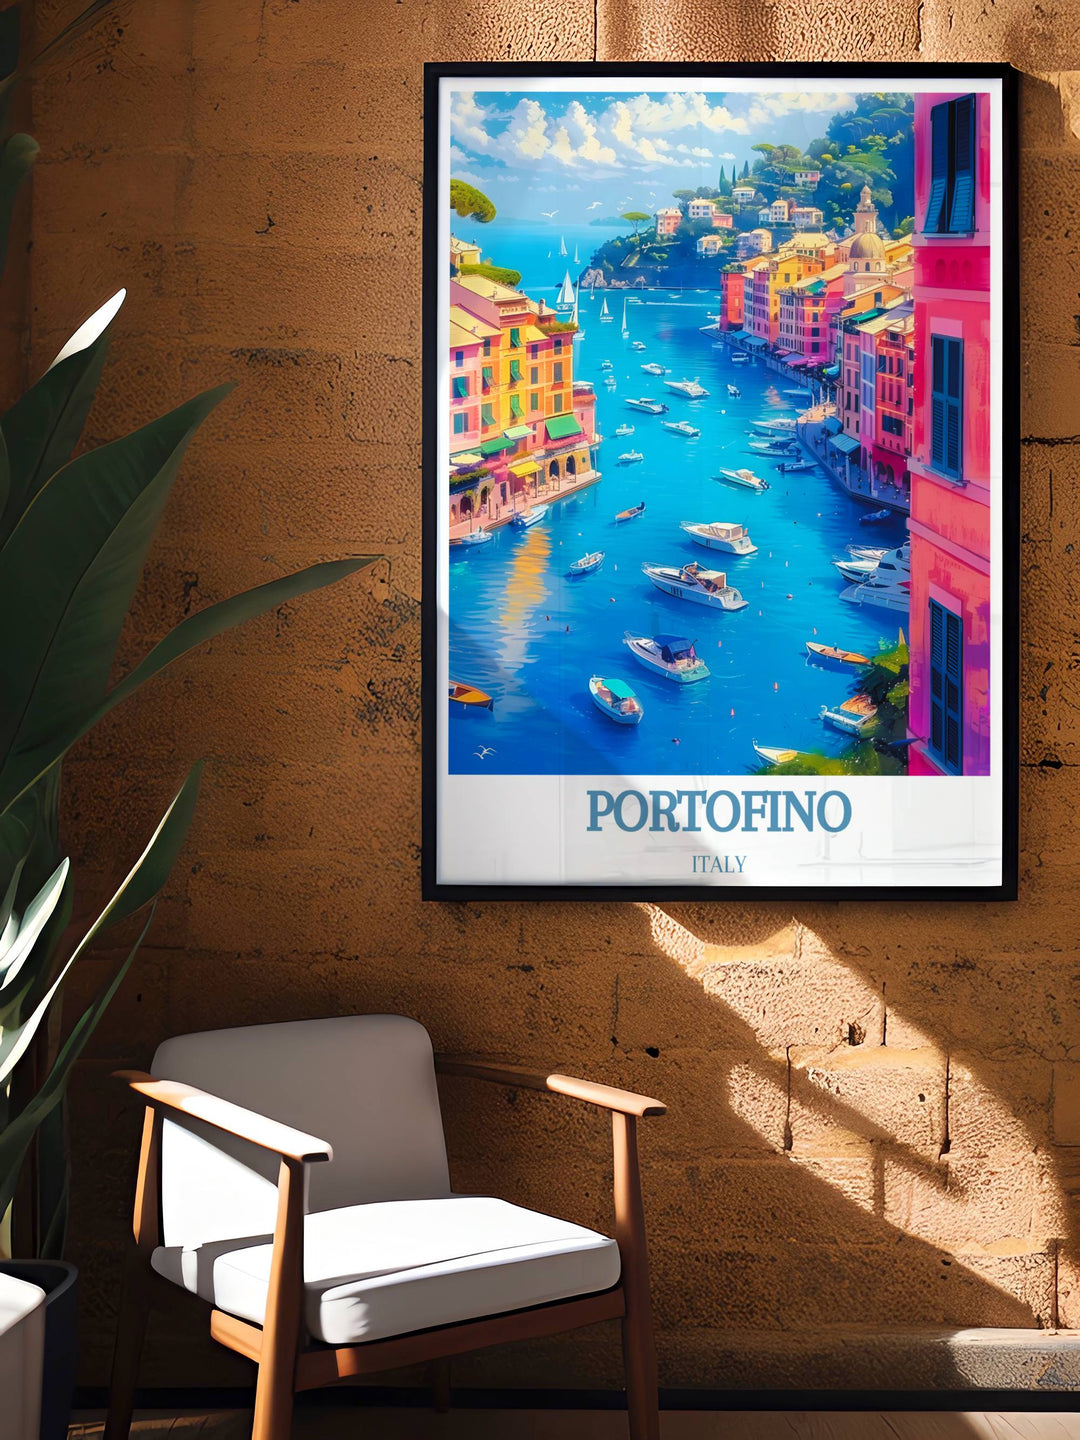 Italian Riviera Travel Poster capturing the picturesque views of Portofino, with vibrant colors and intricate details highlighting the serene ambiance of this iconic location.